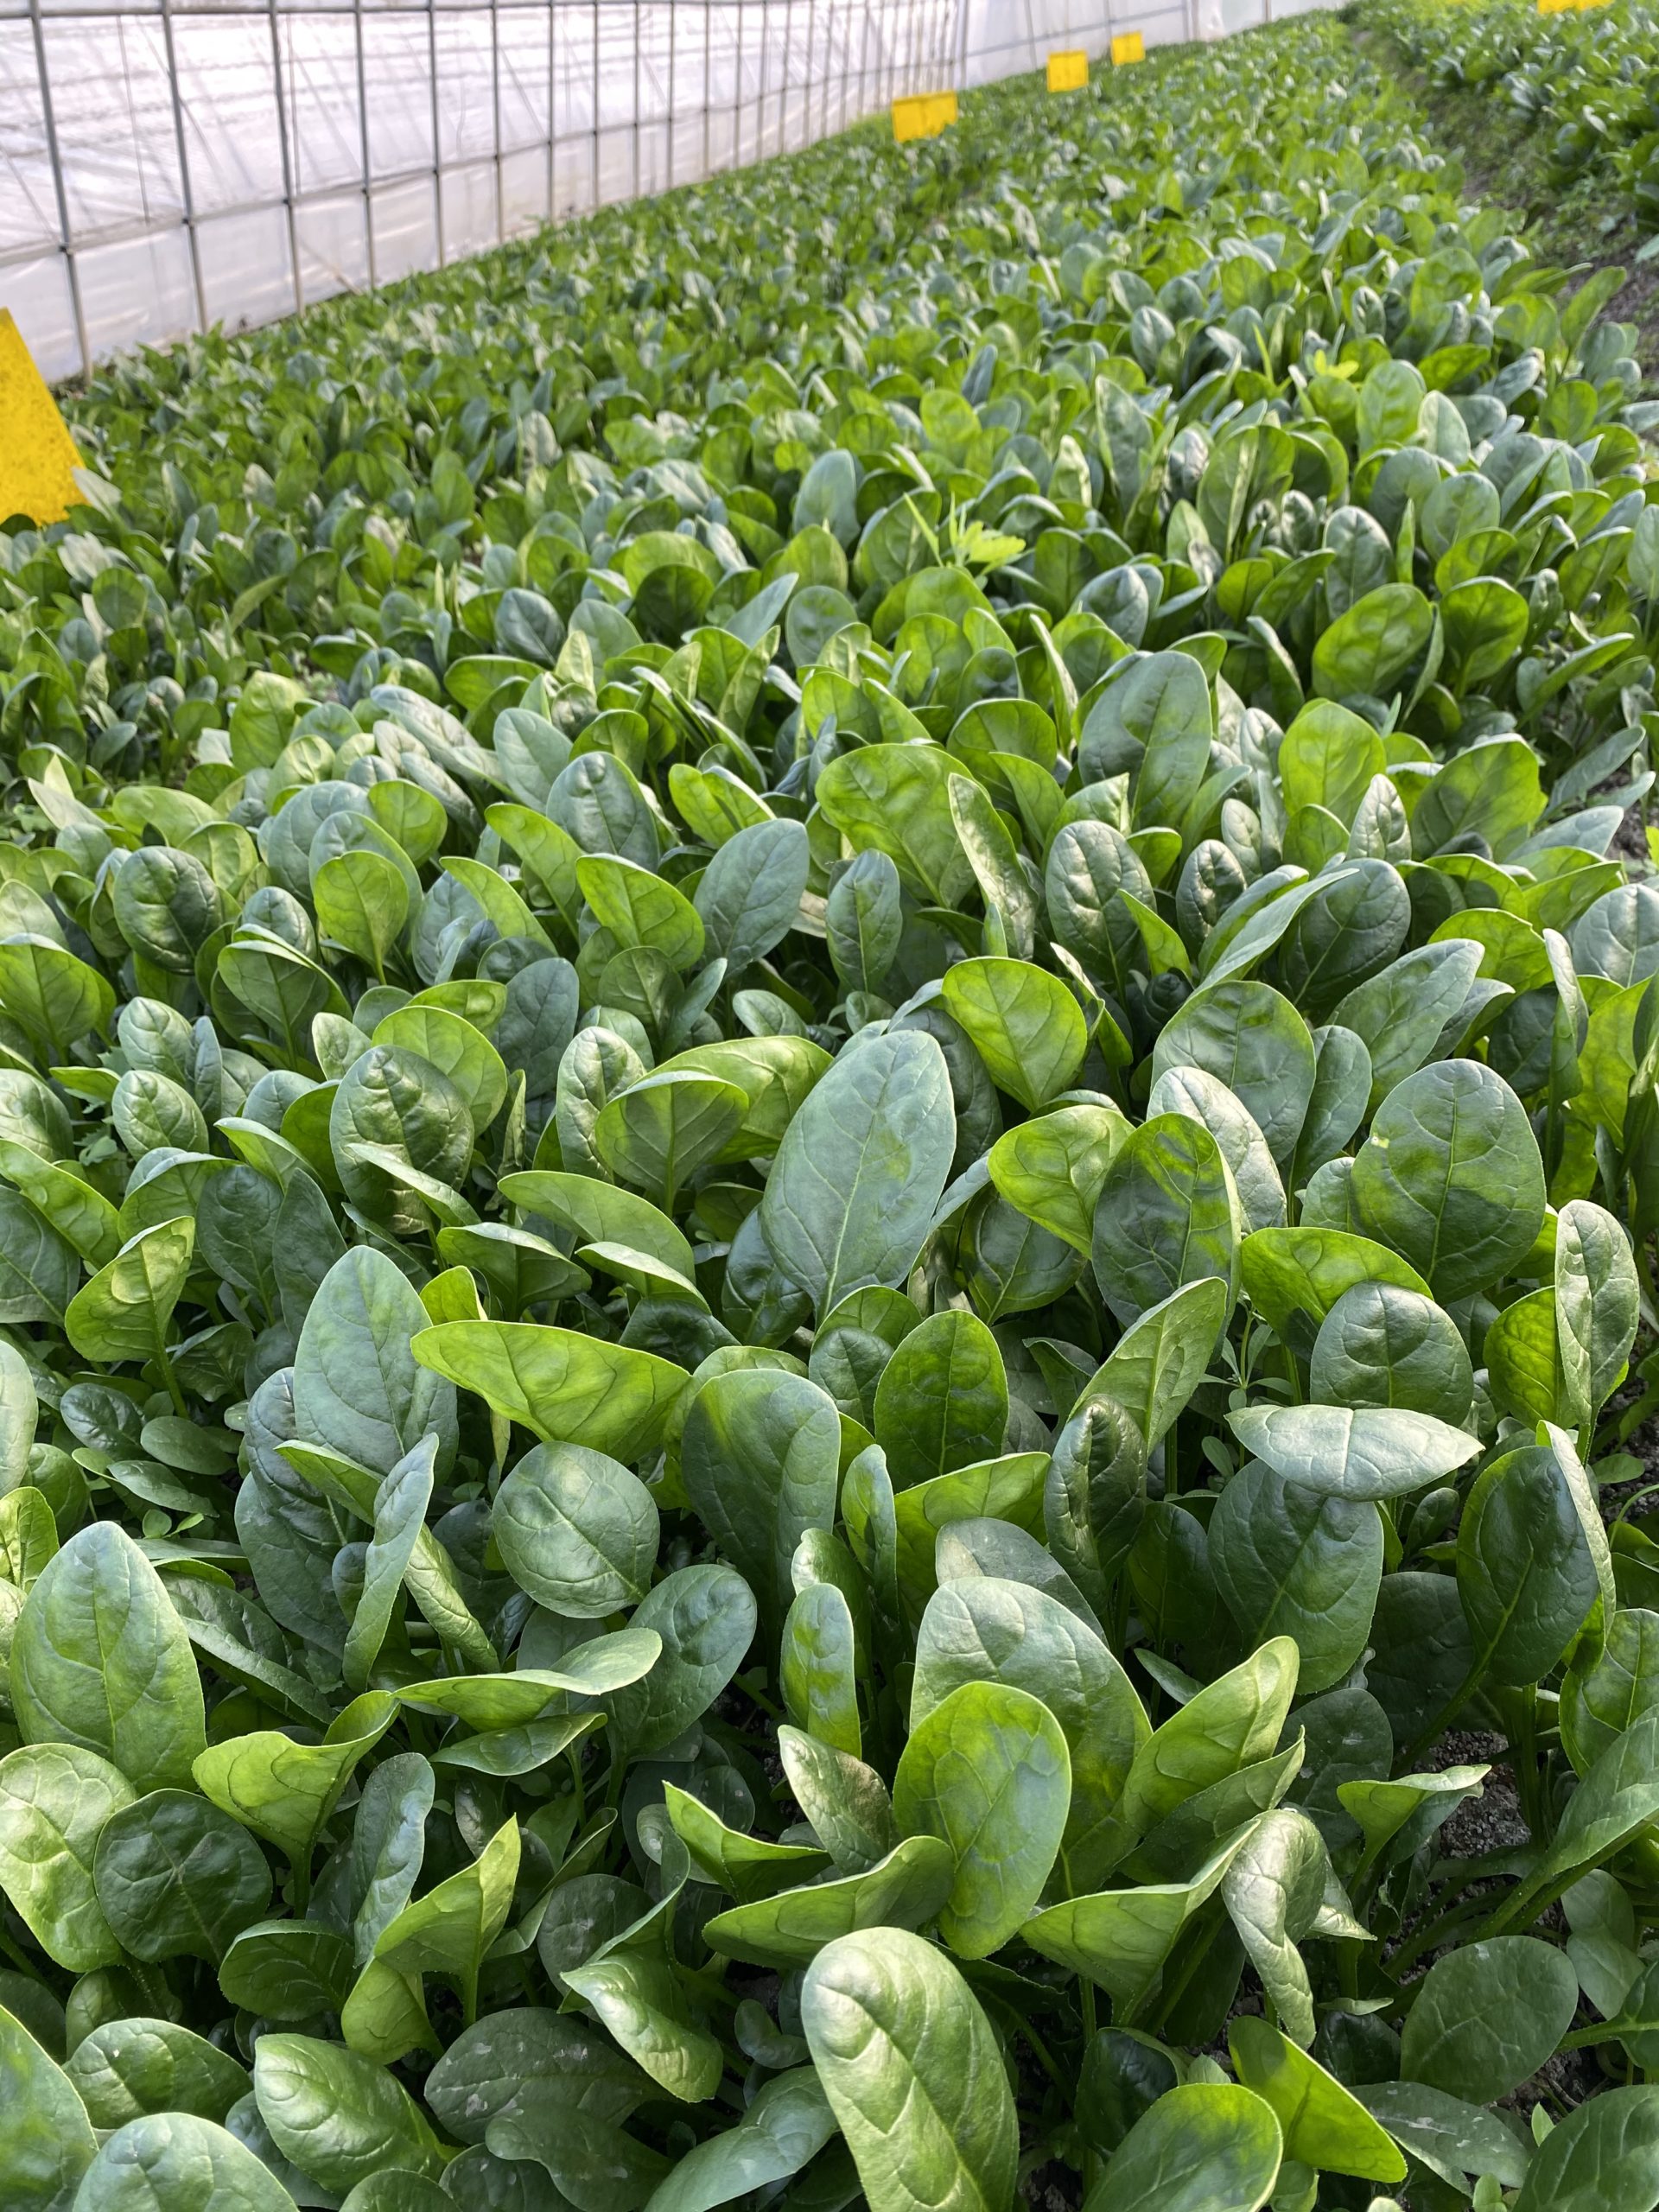 A closeup of some leafy spinach plants in a greenhouse, with rows of the plants going far back into the distance. There are small yellow flags at regular intervals along the left edge.